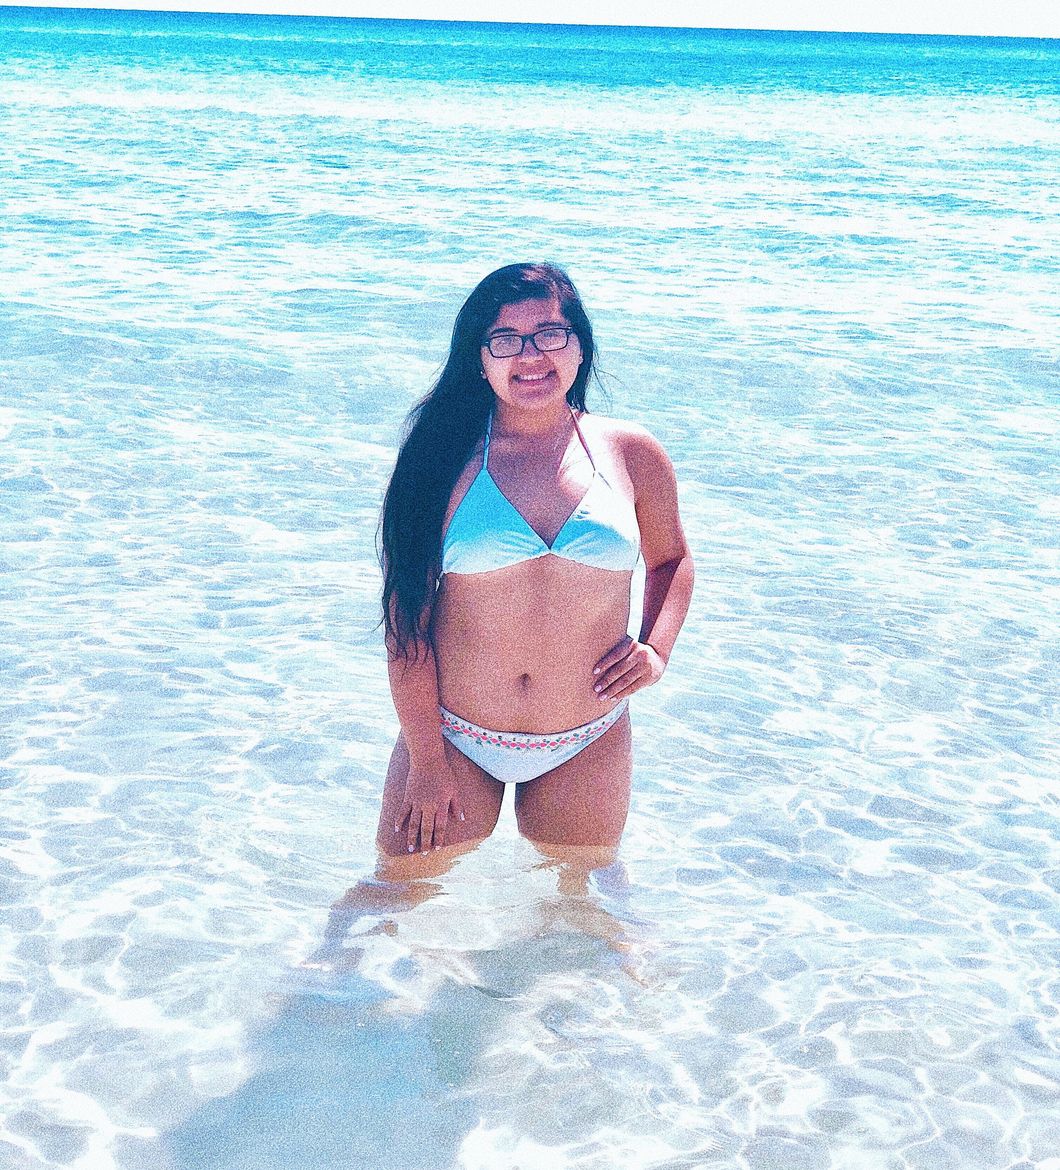 I Had To Learn To Love My Body Before I Could Confidently Date